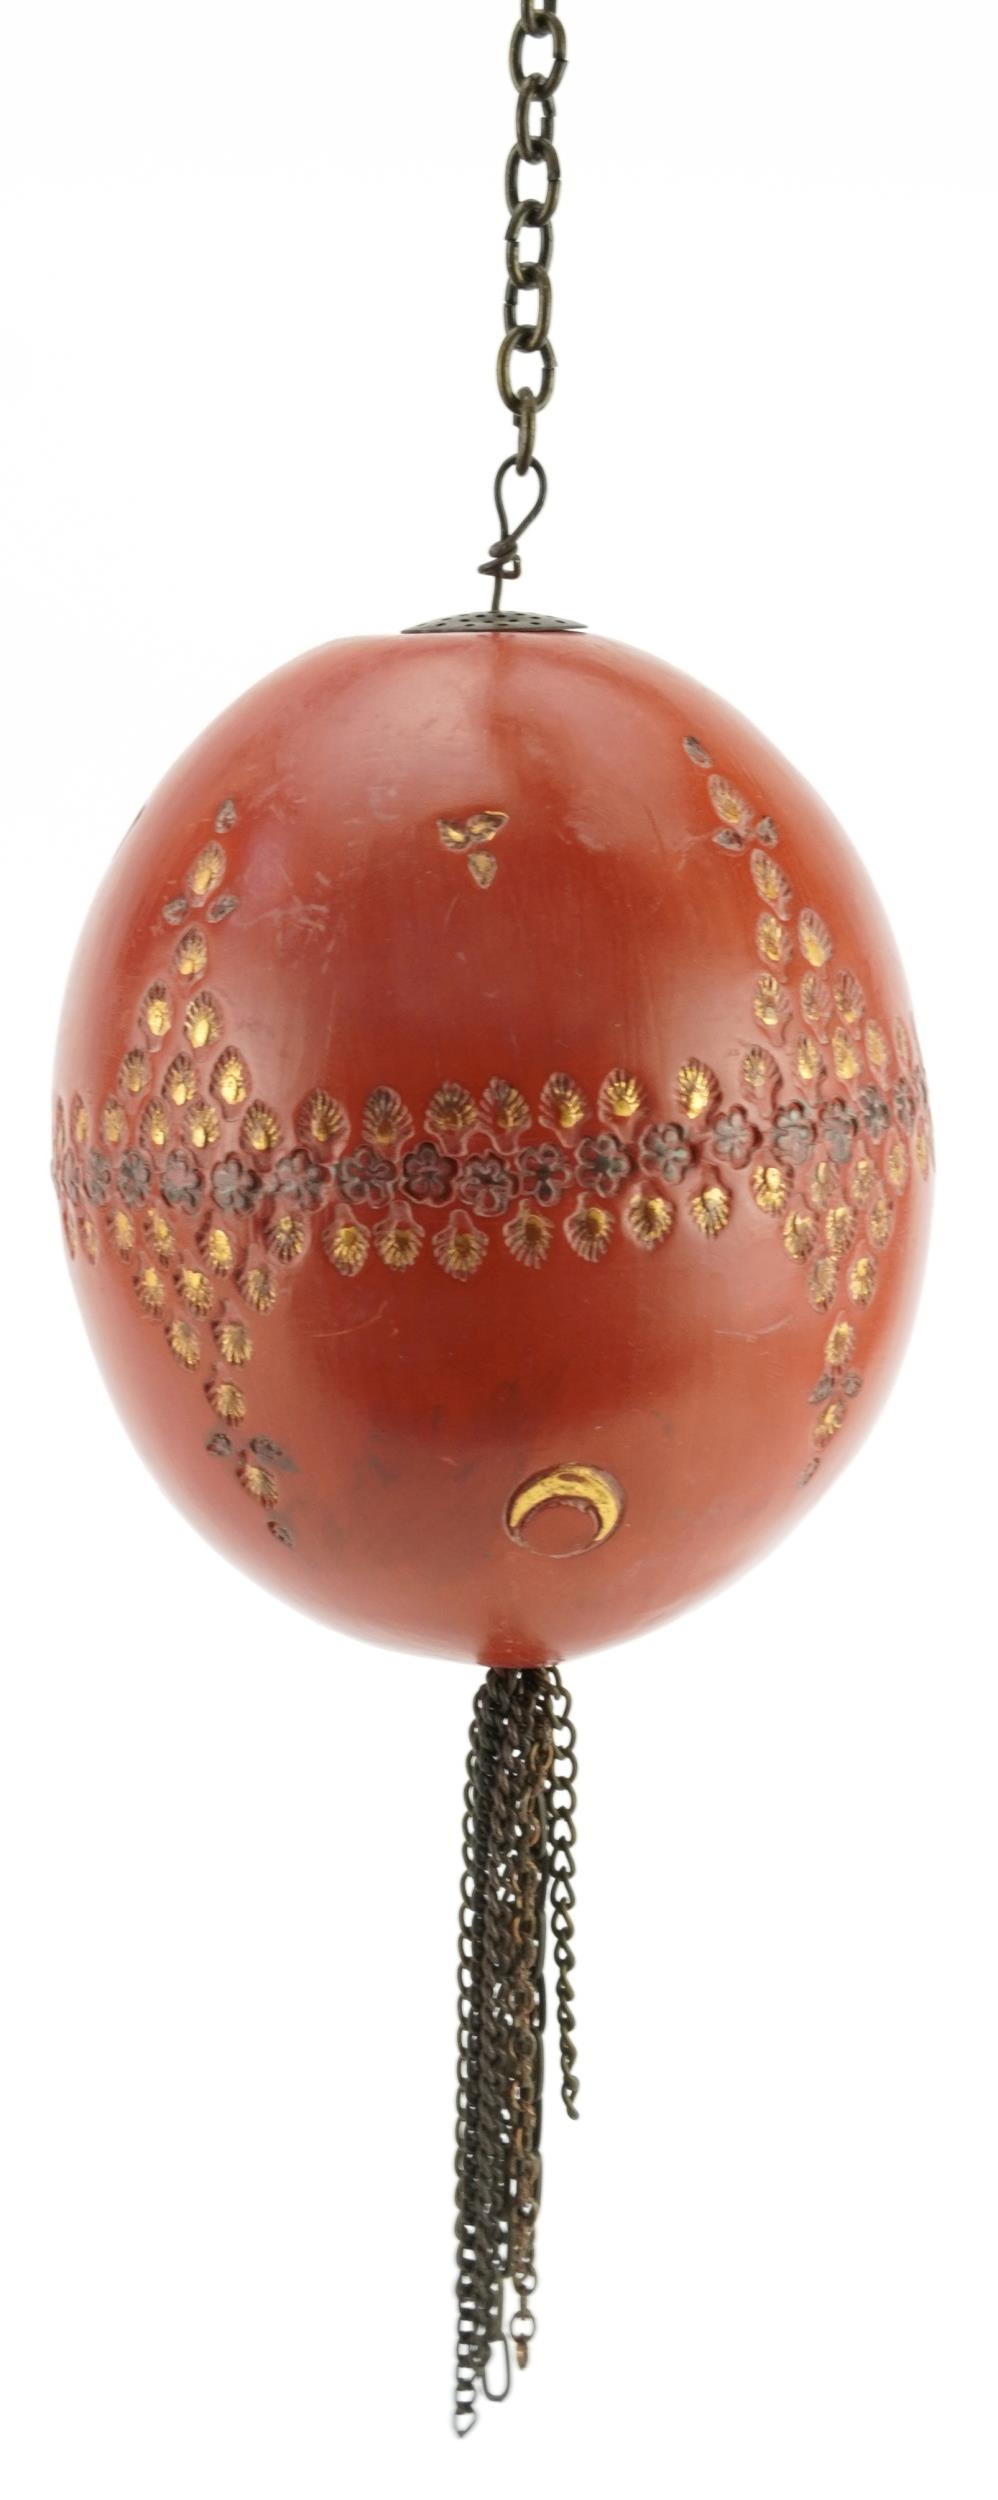 Turkish Ottoman Tophane hanging ball, 13.5cm high : For further information on this lot please visit